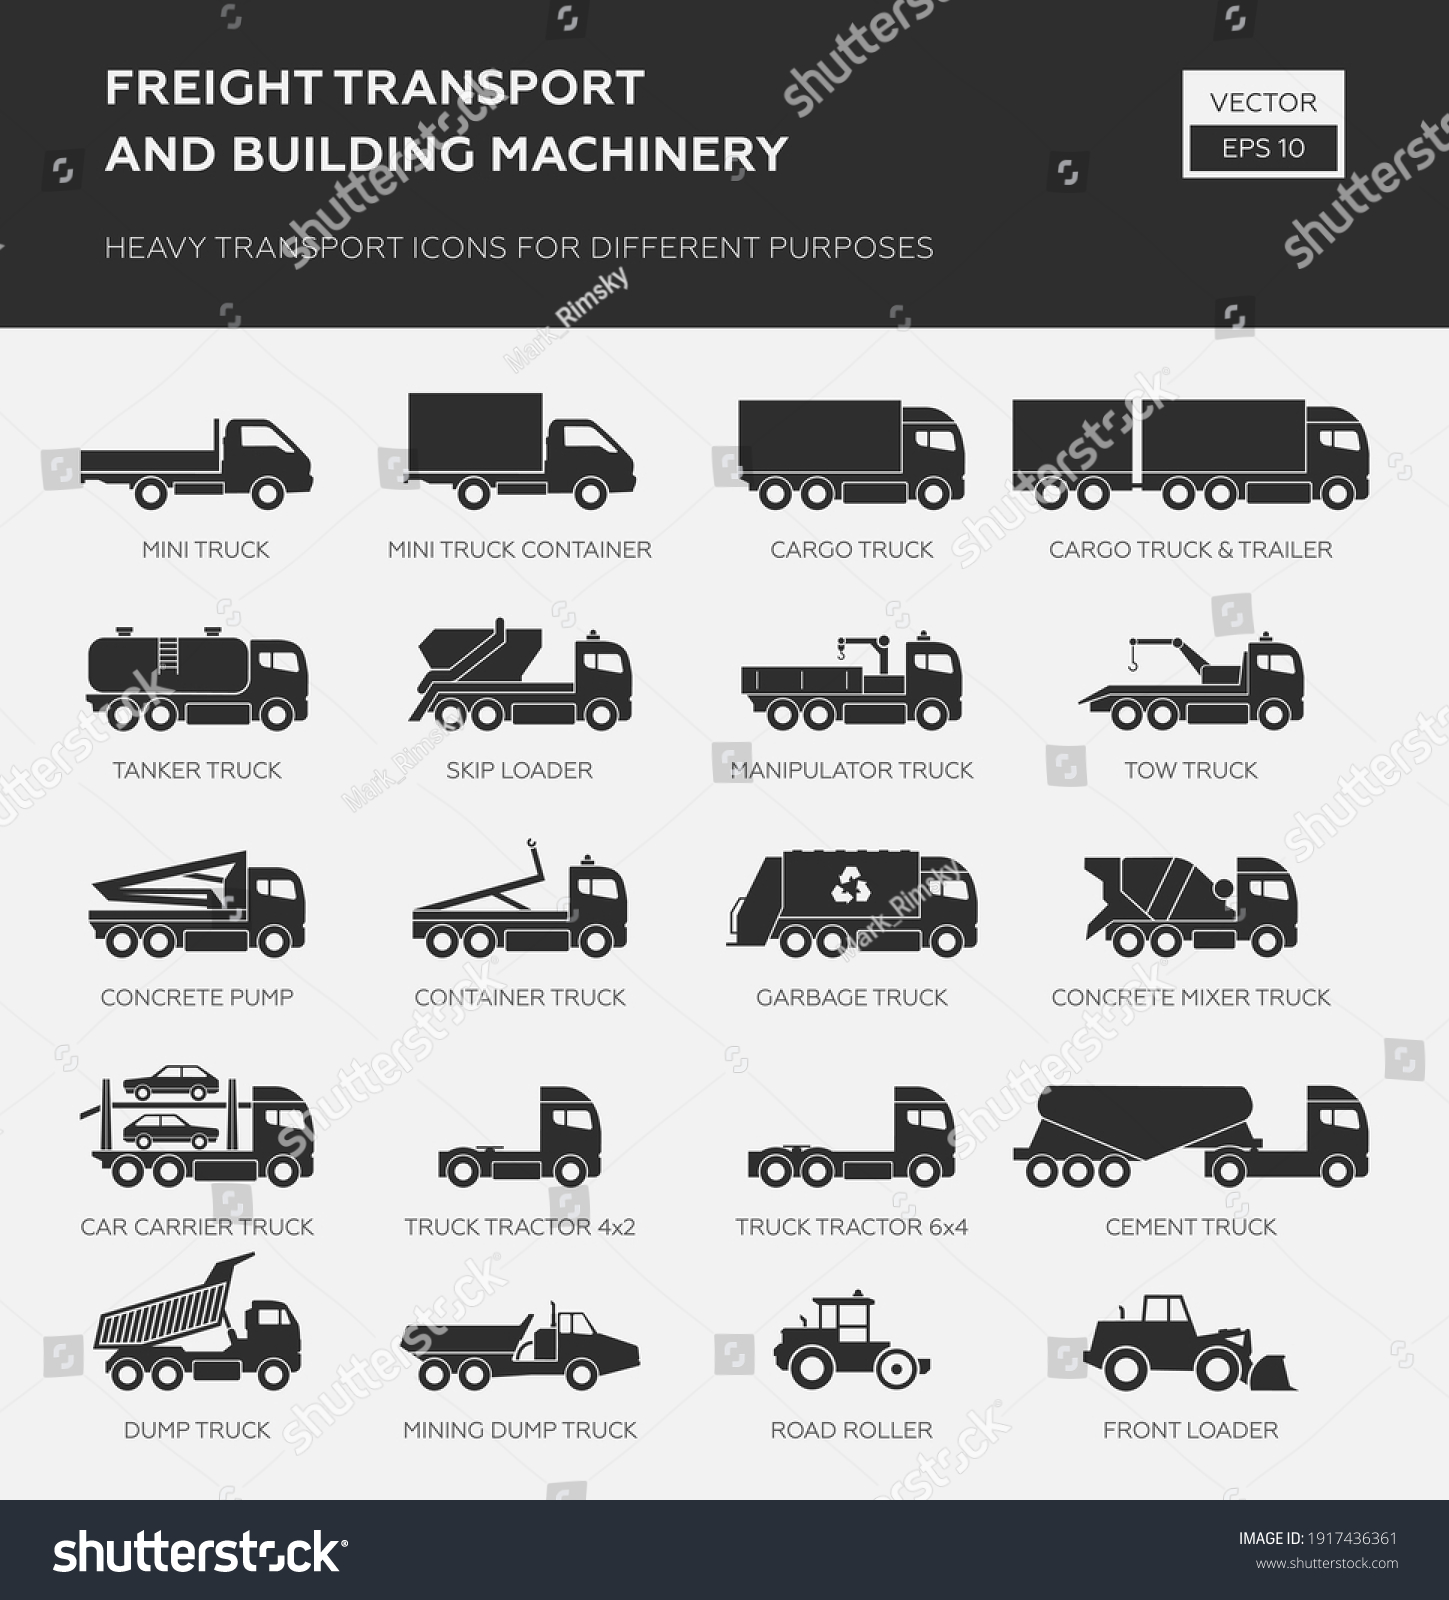 SVG of Freight transport and building machinery. Heavy transport icons for different purpose. Truck icons.  svg